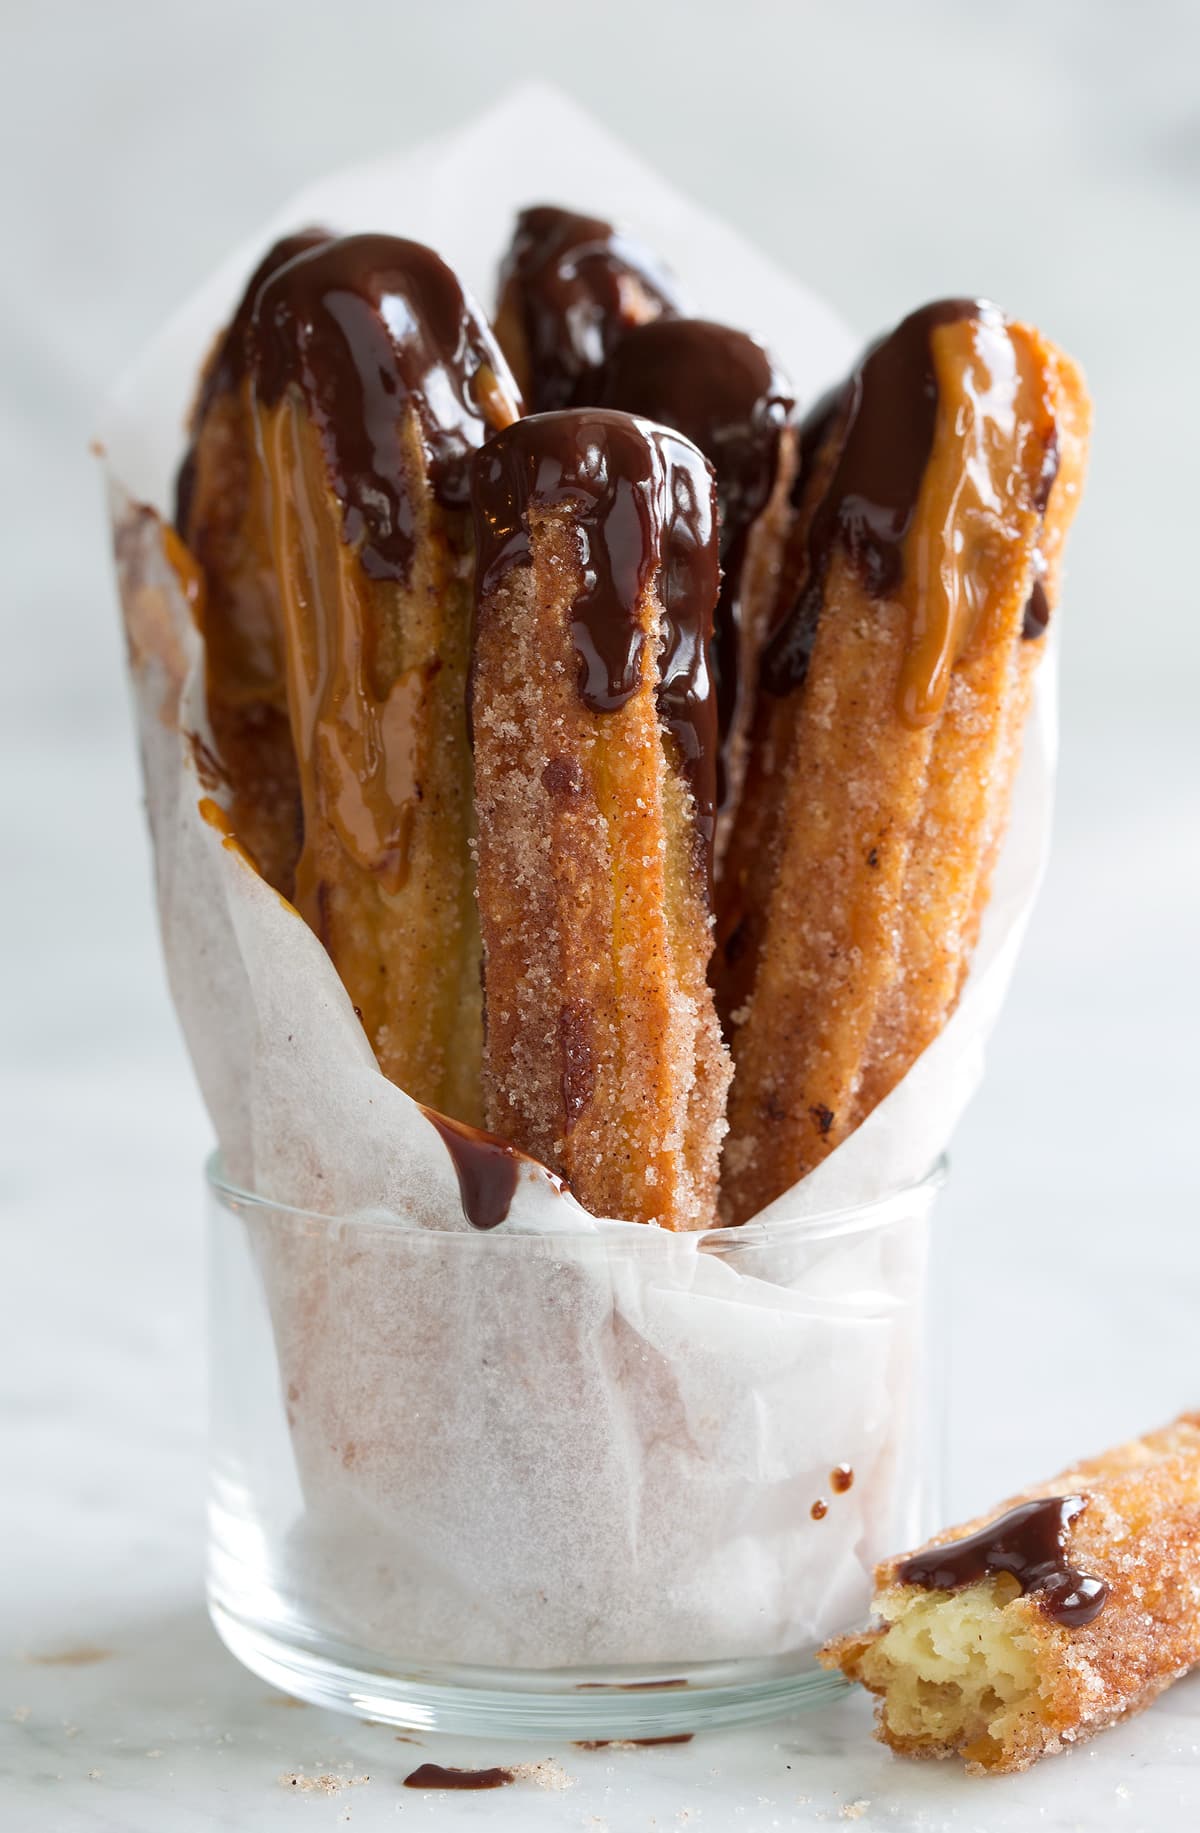 How To Make Churros Without Butter